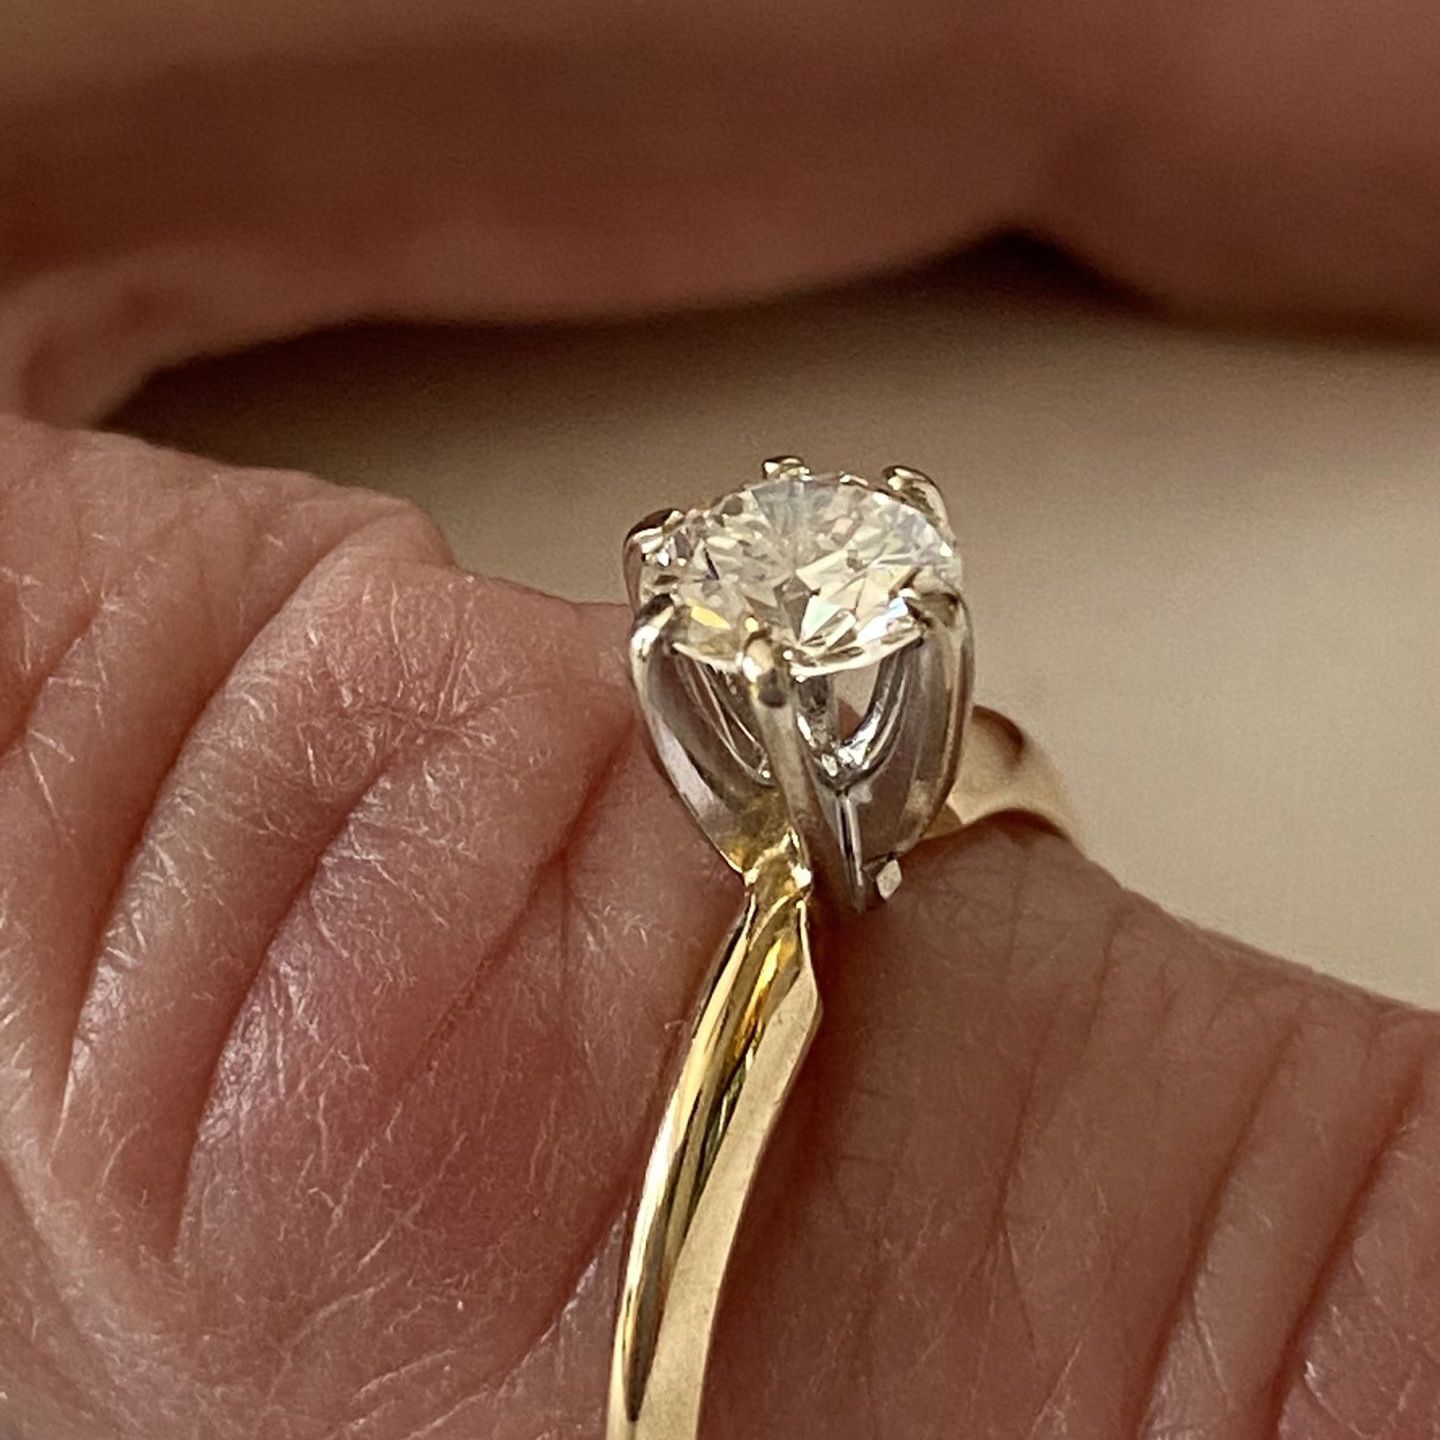 Estate sale - 1942 unique european cut diamond engagement ring - excellent  condition - lowered price to 1700 - firm no offers